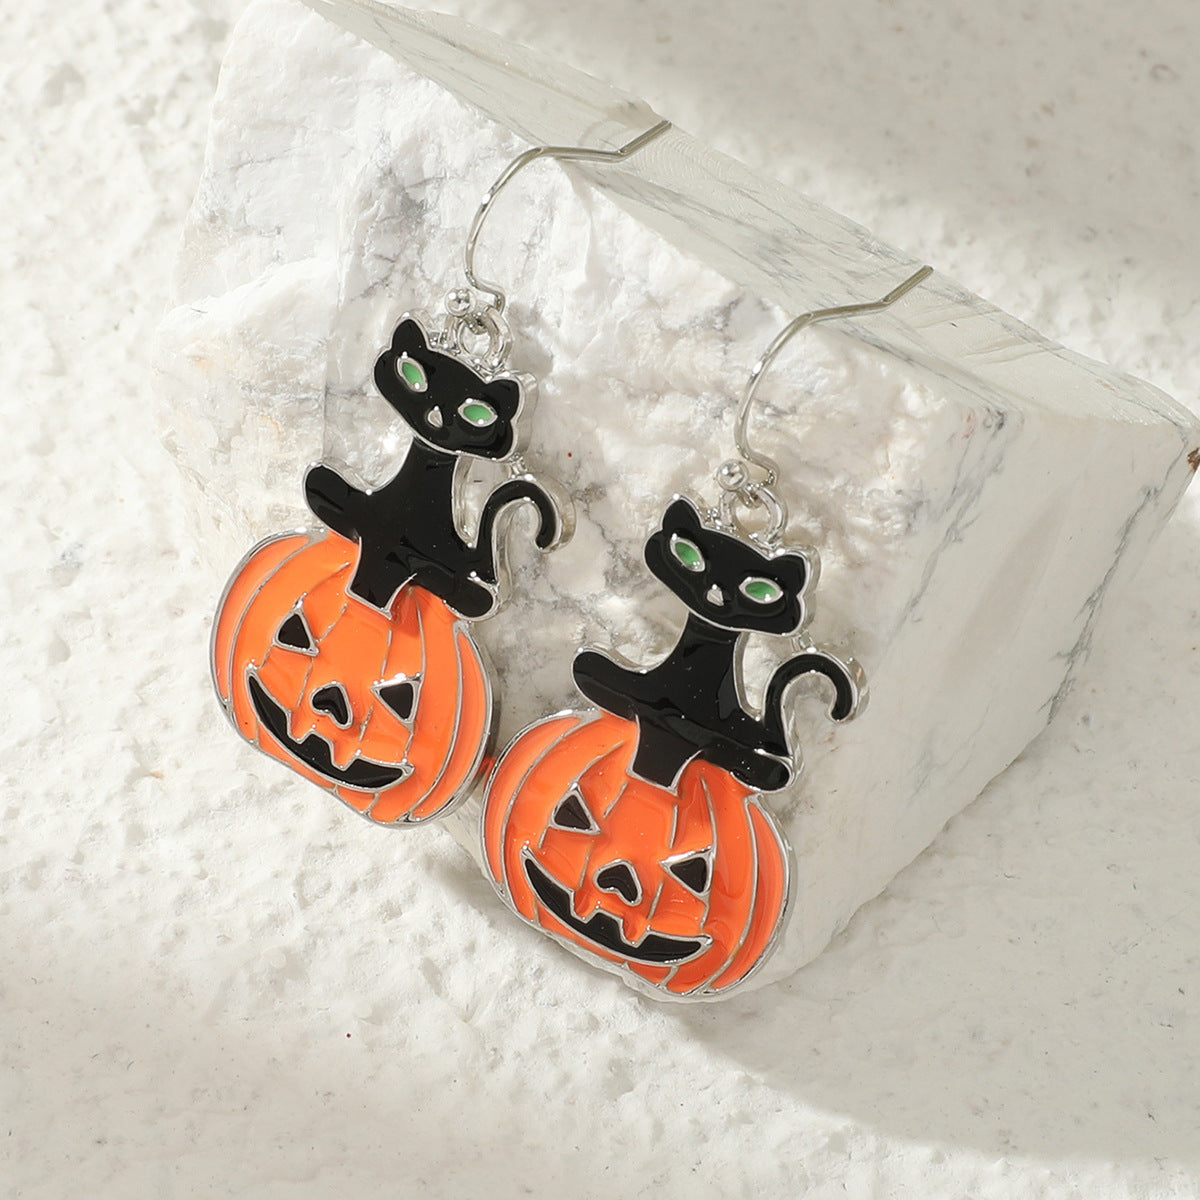 Exaggerated Spider Skull Earrings Halloween Gift